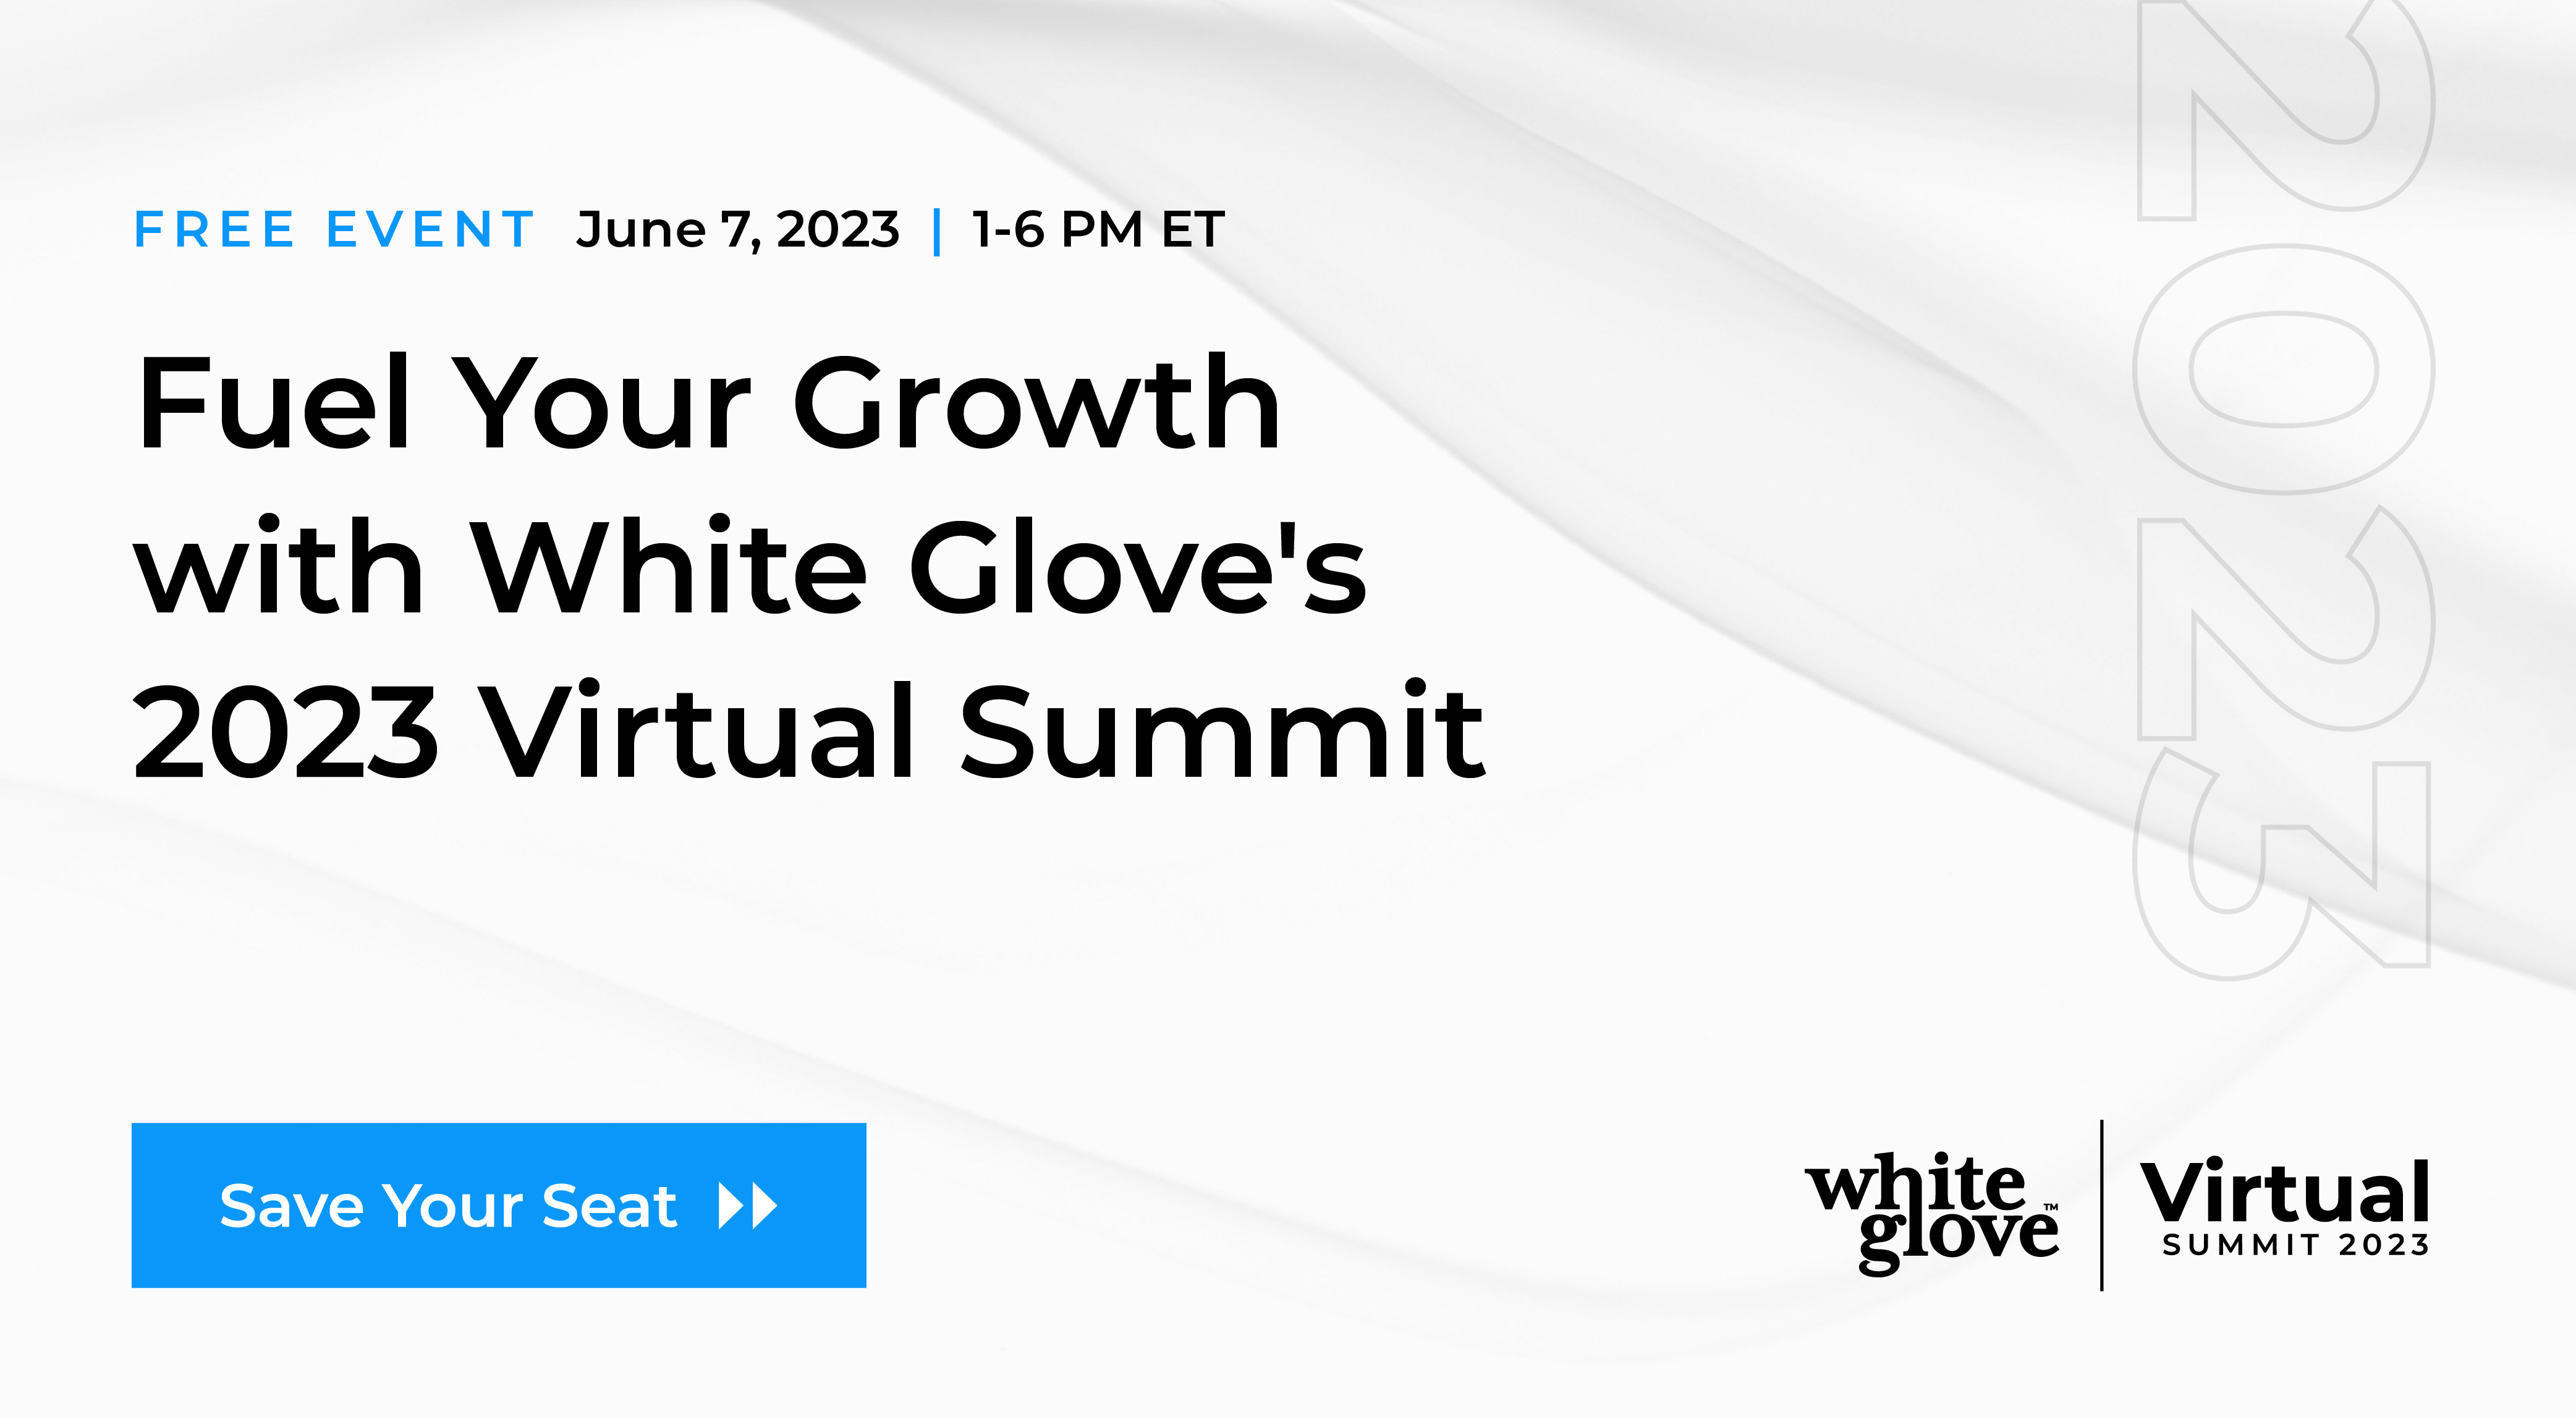 2023 Virtual Summit for NAIFA partner White Glove will take place on June 7